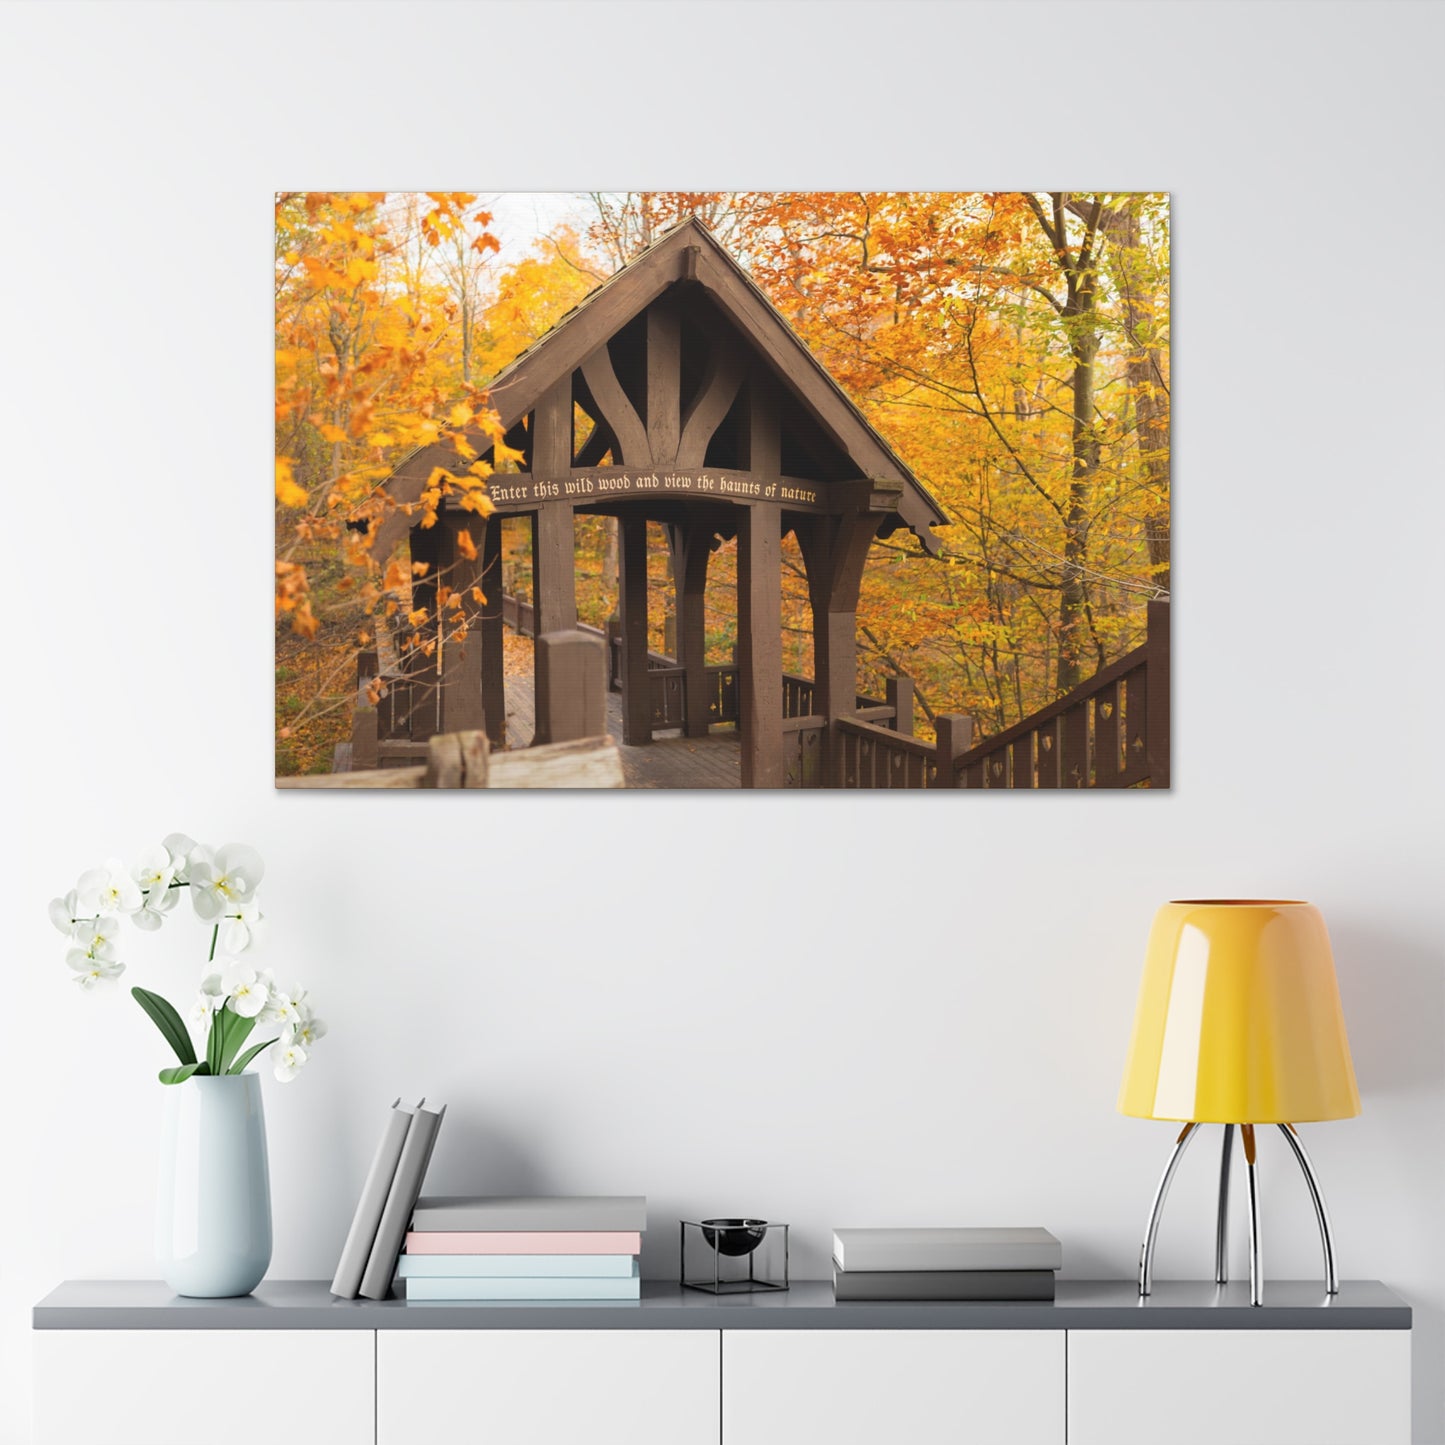 7 Bridges Trail’s Covered Bridge at Grant Park in South Milwaukee Wisconsin, Photography Canvas Wrap Wall Art